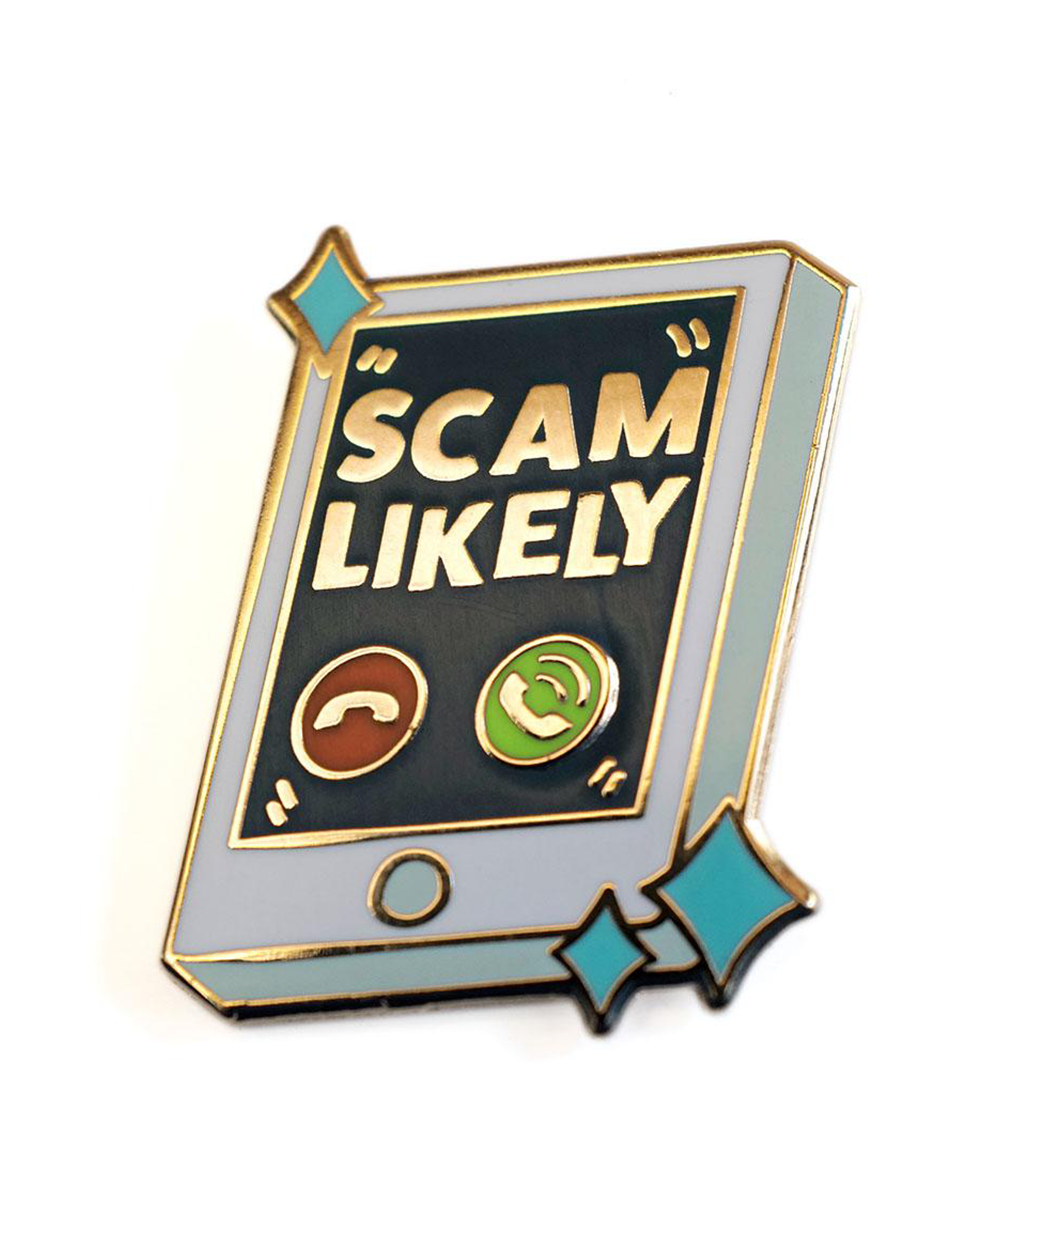 Gold enamel pin of a phone ringing with the caller ID in gold saying 